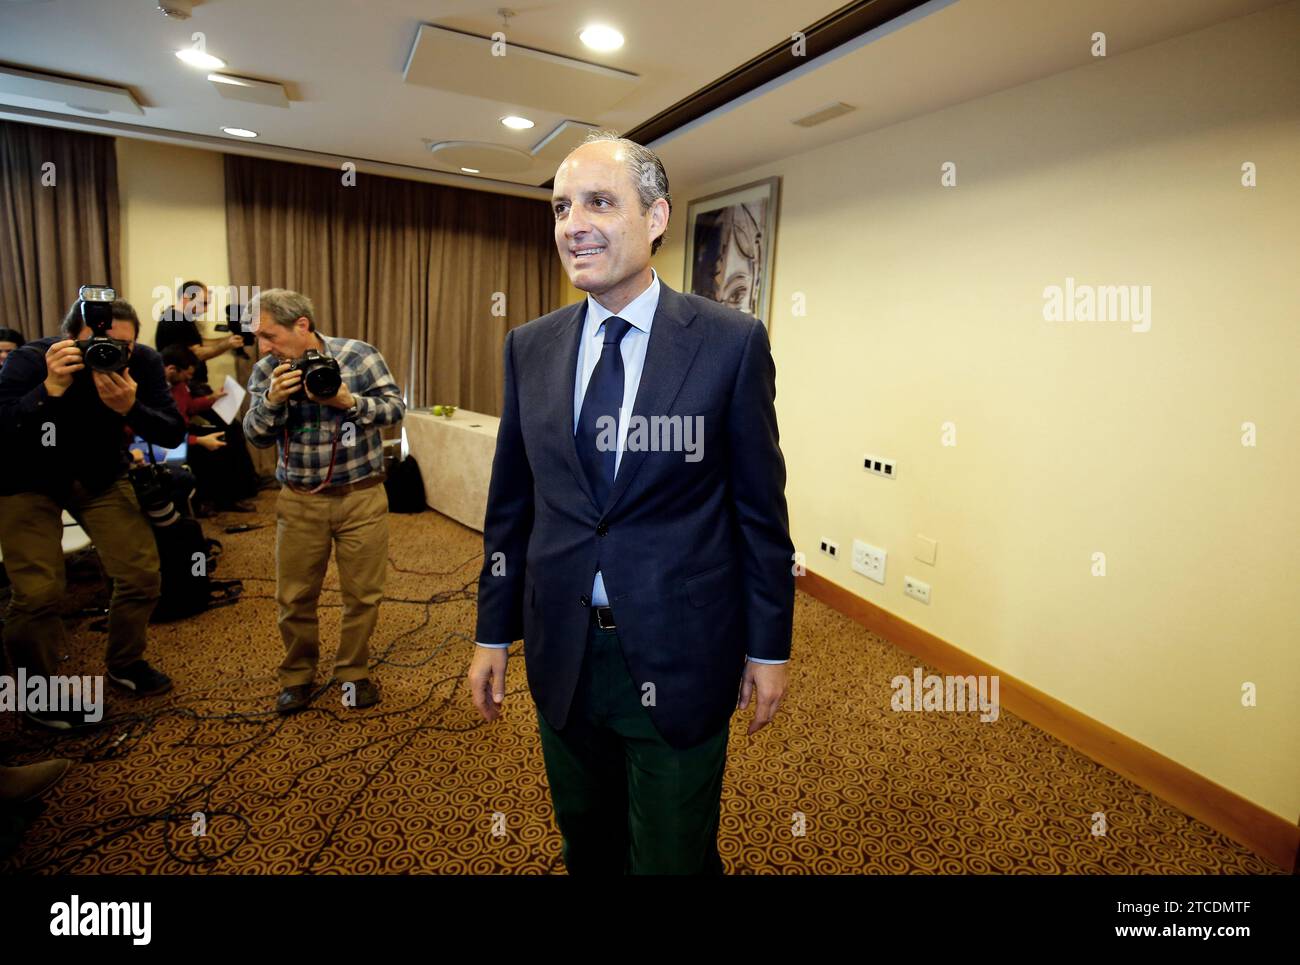 Valencia, 06/20/2016. Francisco Camps, former president of the Valencian Community, at a press conference regarding the accusations received. Photo: Rober Solsona ARCHDC. Credit: Album / Archivo ABC / Rober Solsona Stock Photo